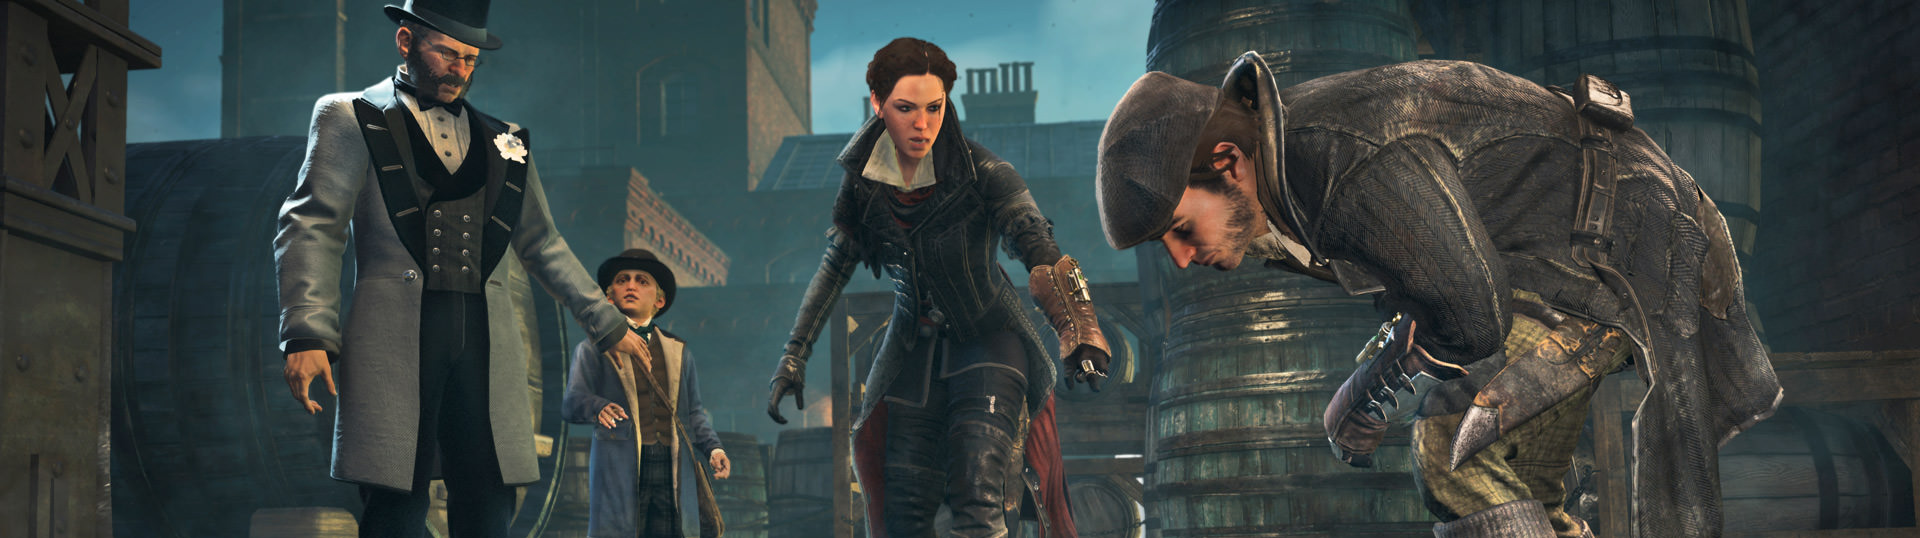 Buy Assassin's Creed Syndicate - The Dreadful Crimes